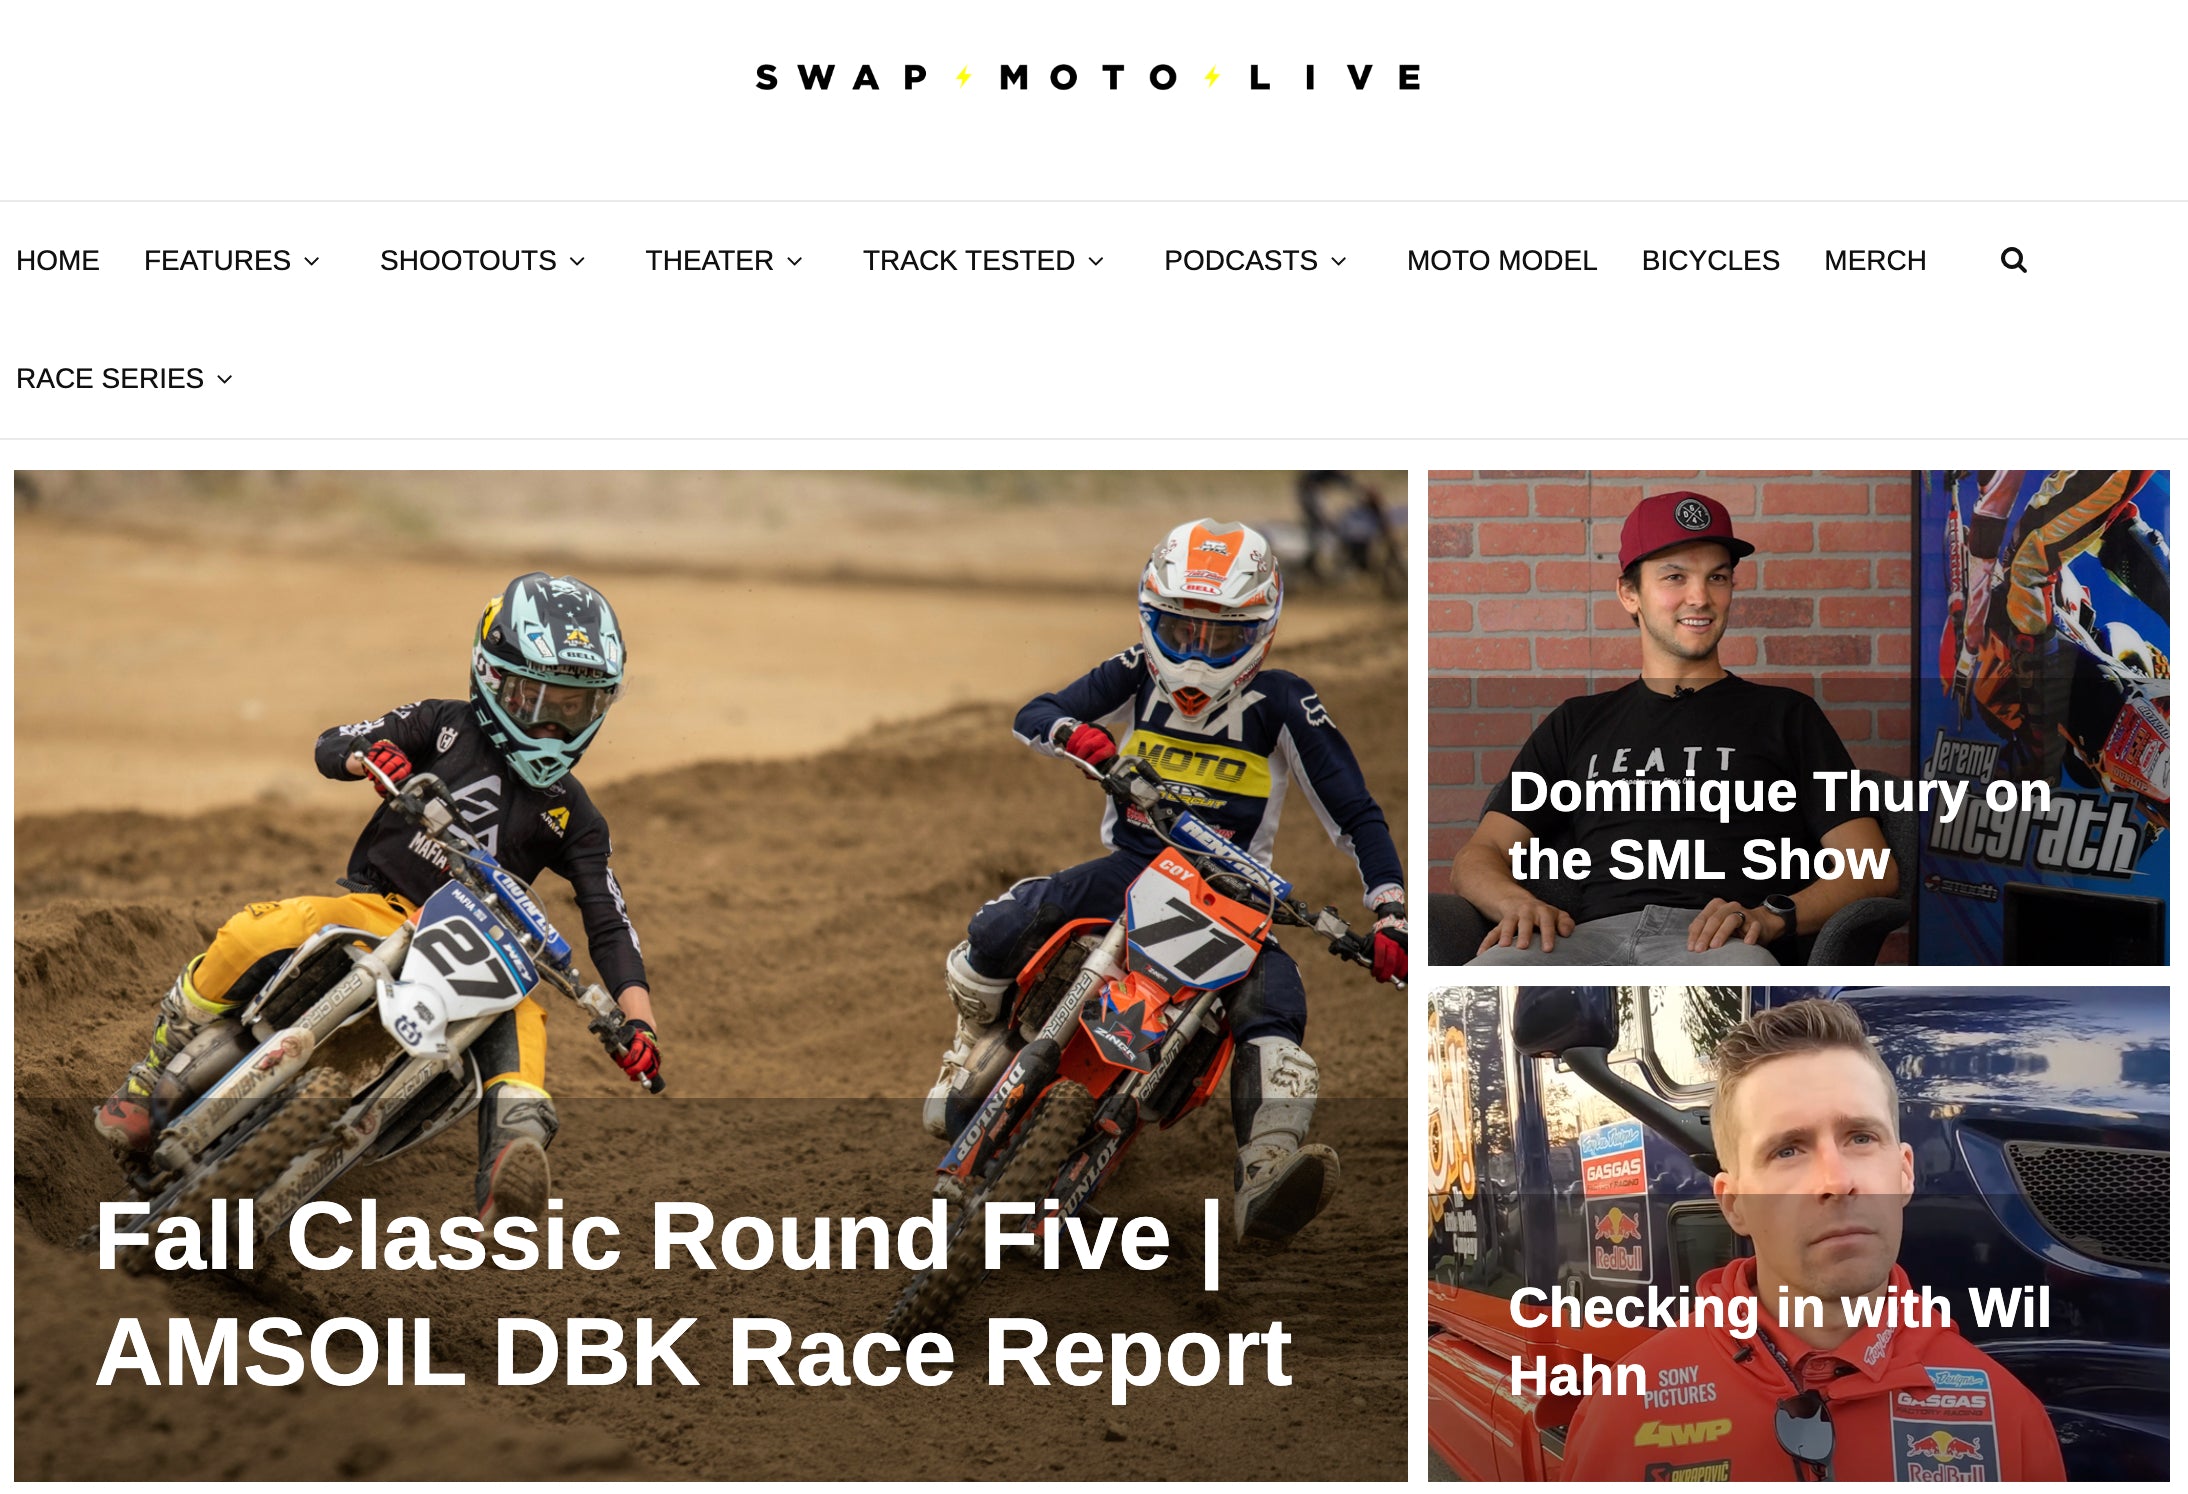 What are the top Motocross Websites and Podcasts